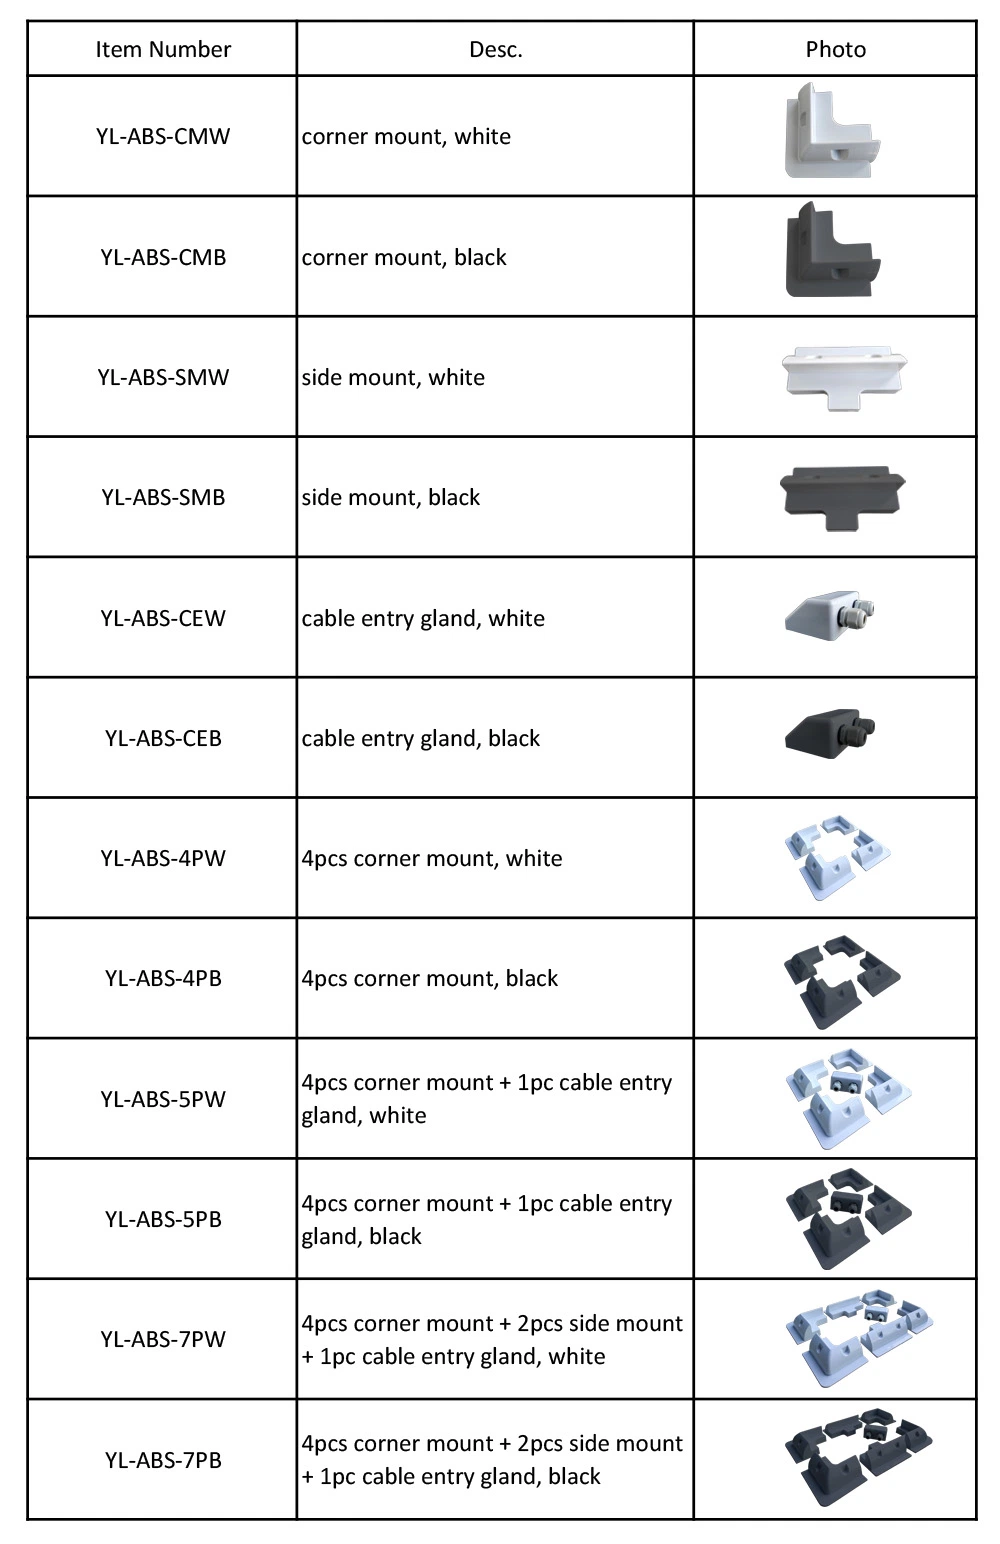 Solar Panel Frame Solar Mount Brackets Motorhome RV Caravan ABS Black and White Null PV System Structure Accessories